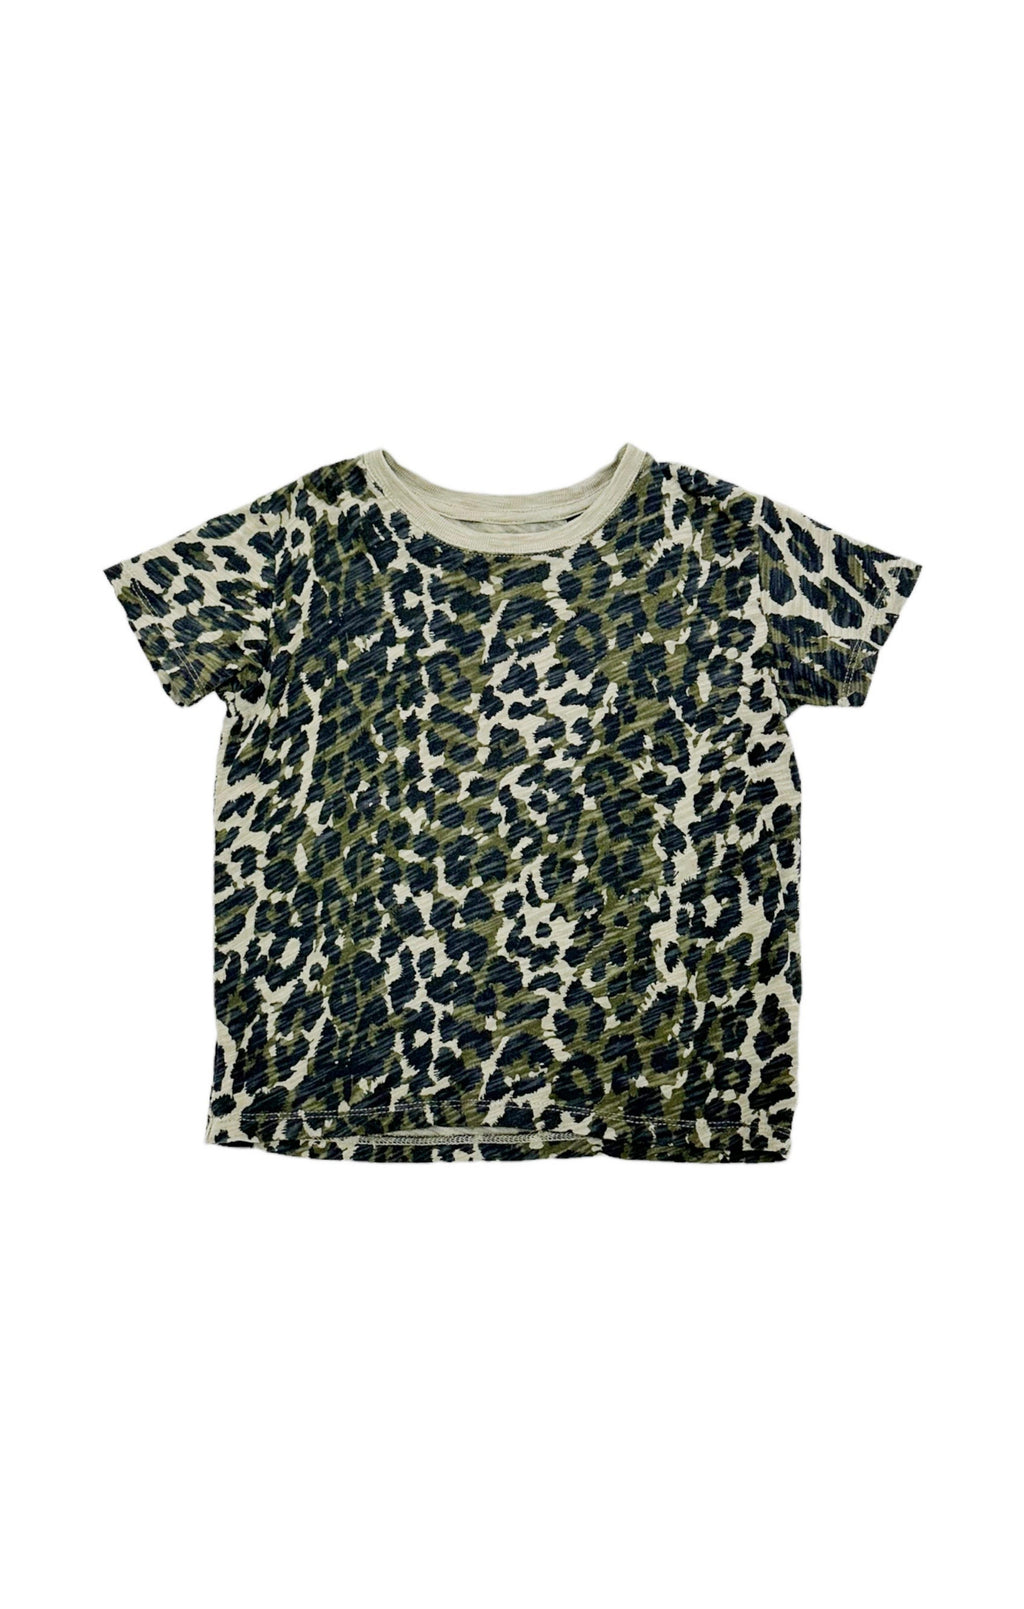 ATM KIDS Top Size: 4 Years